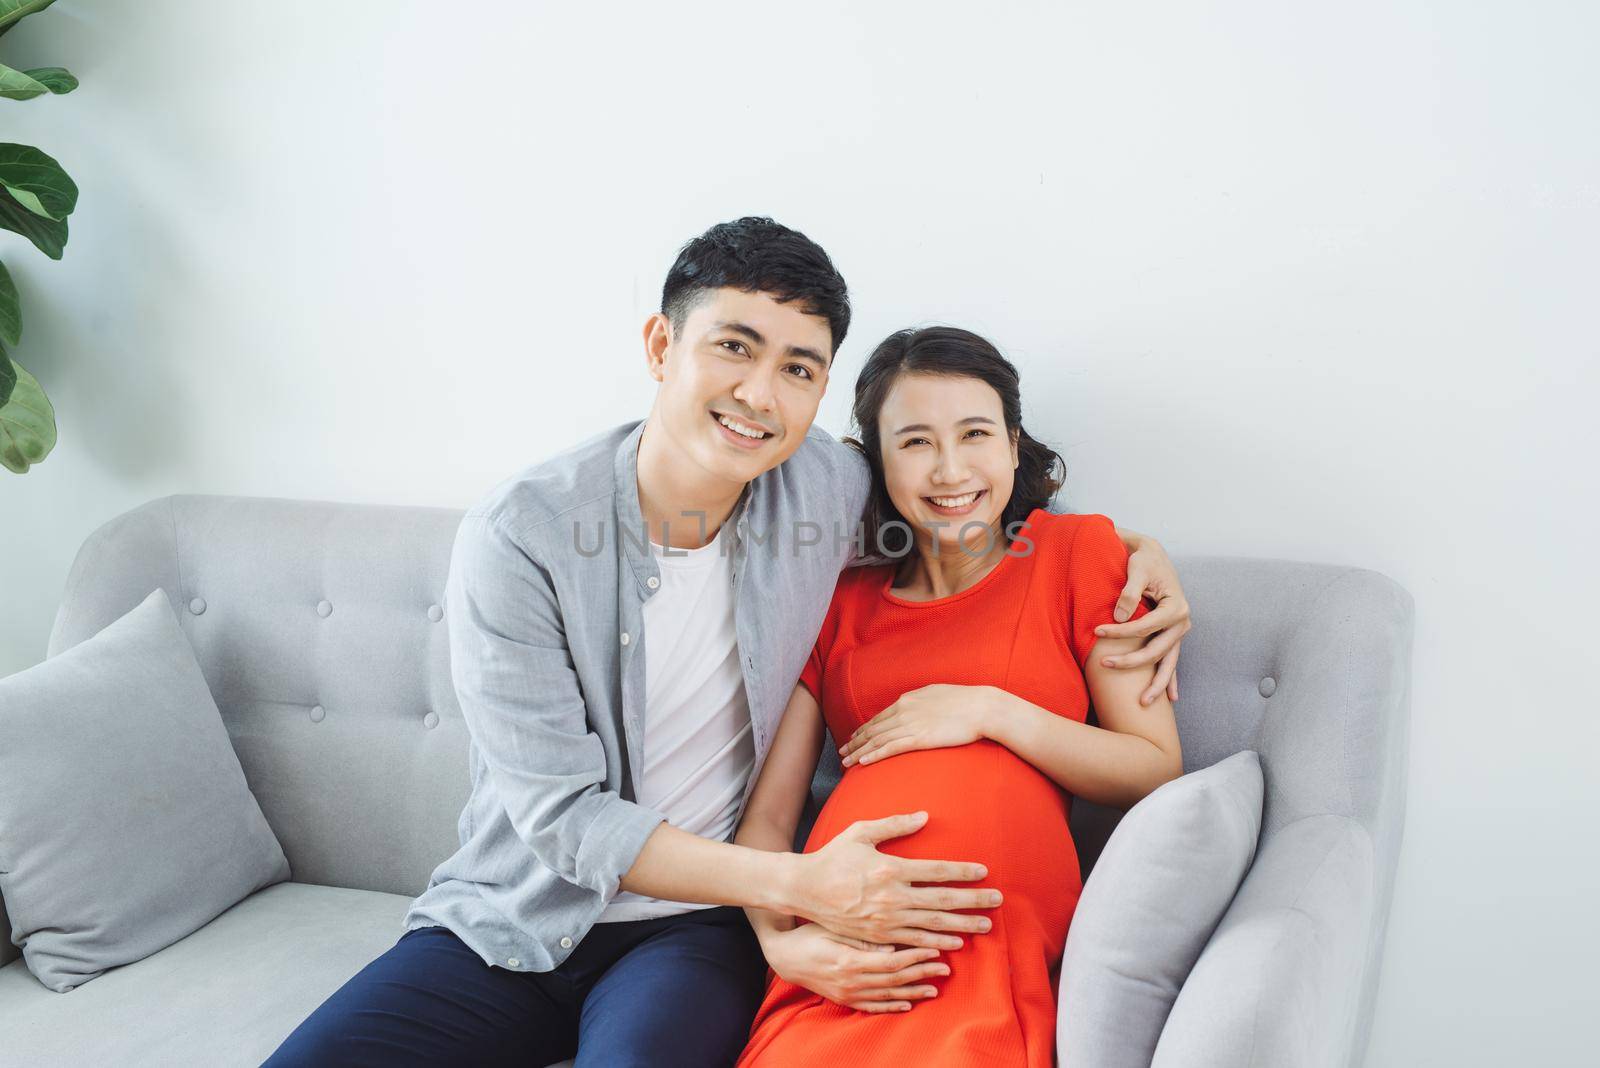 Young couple sitting on couch feeling baby kicking in mother's stomach